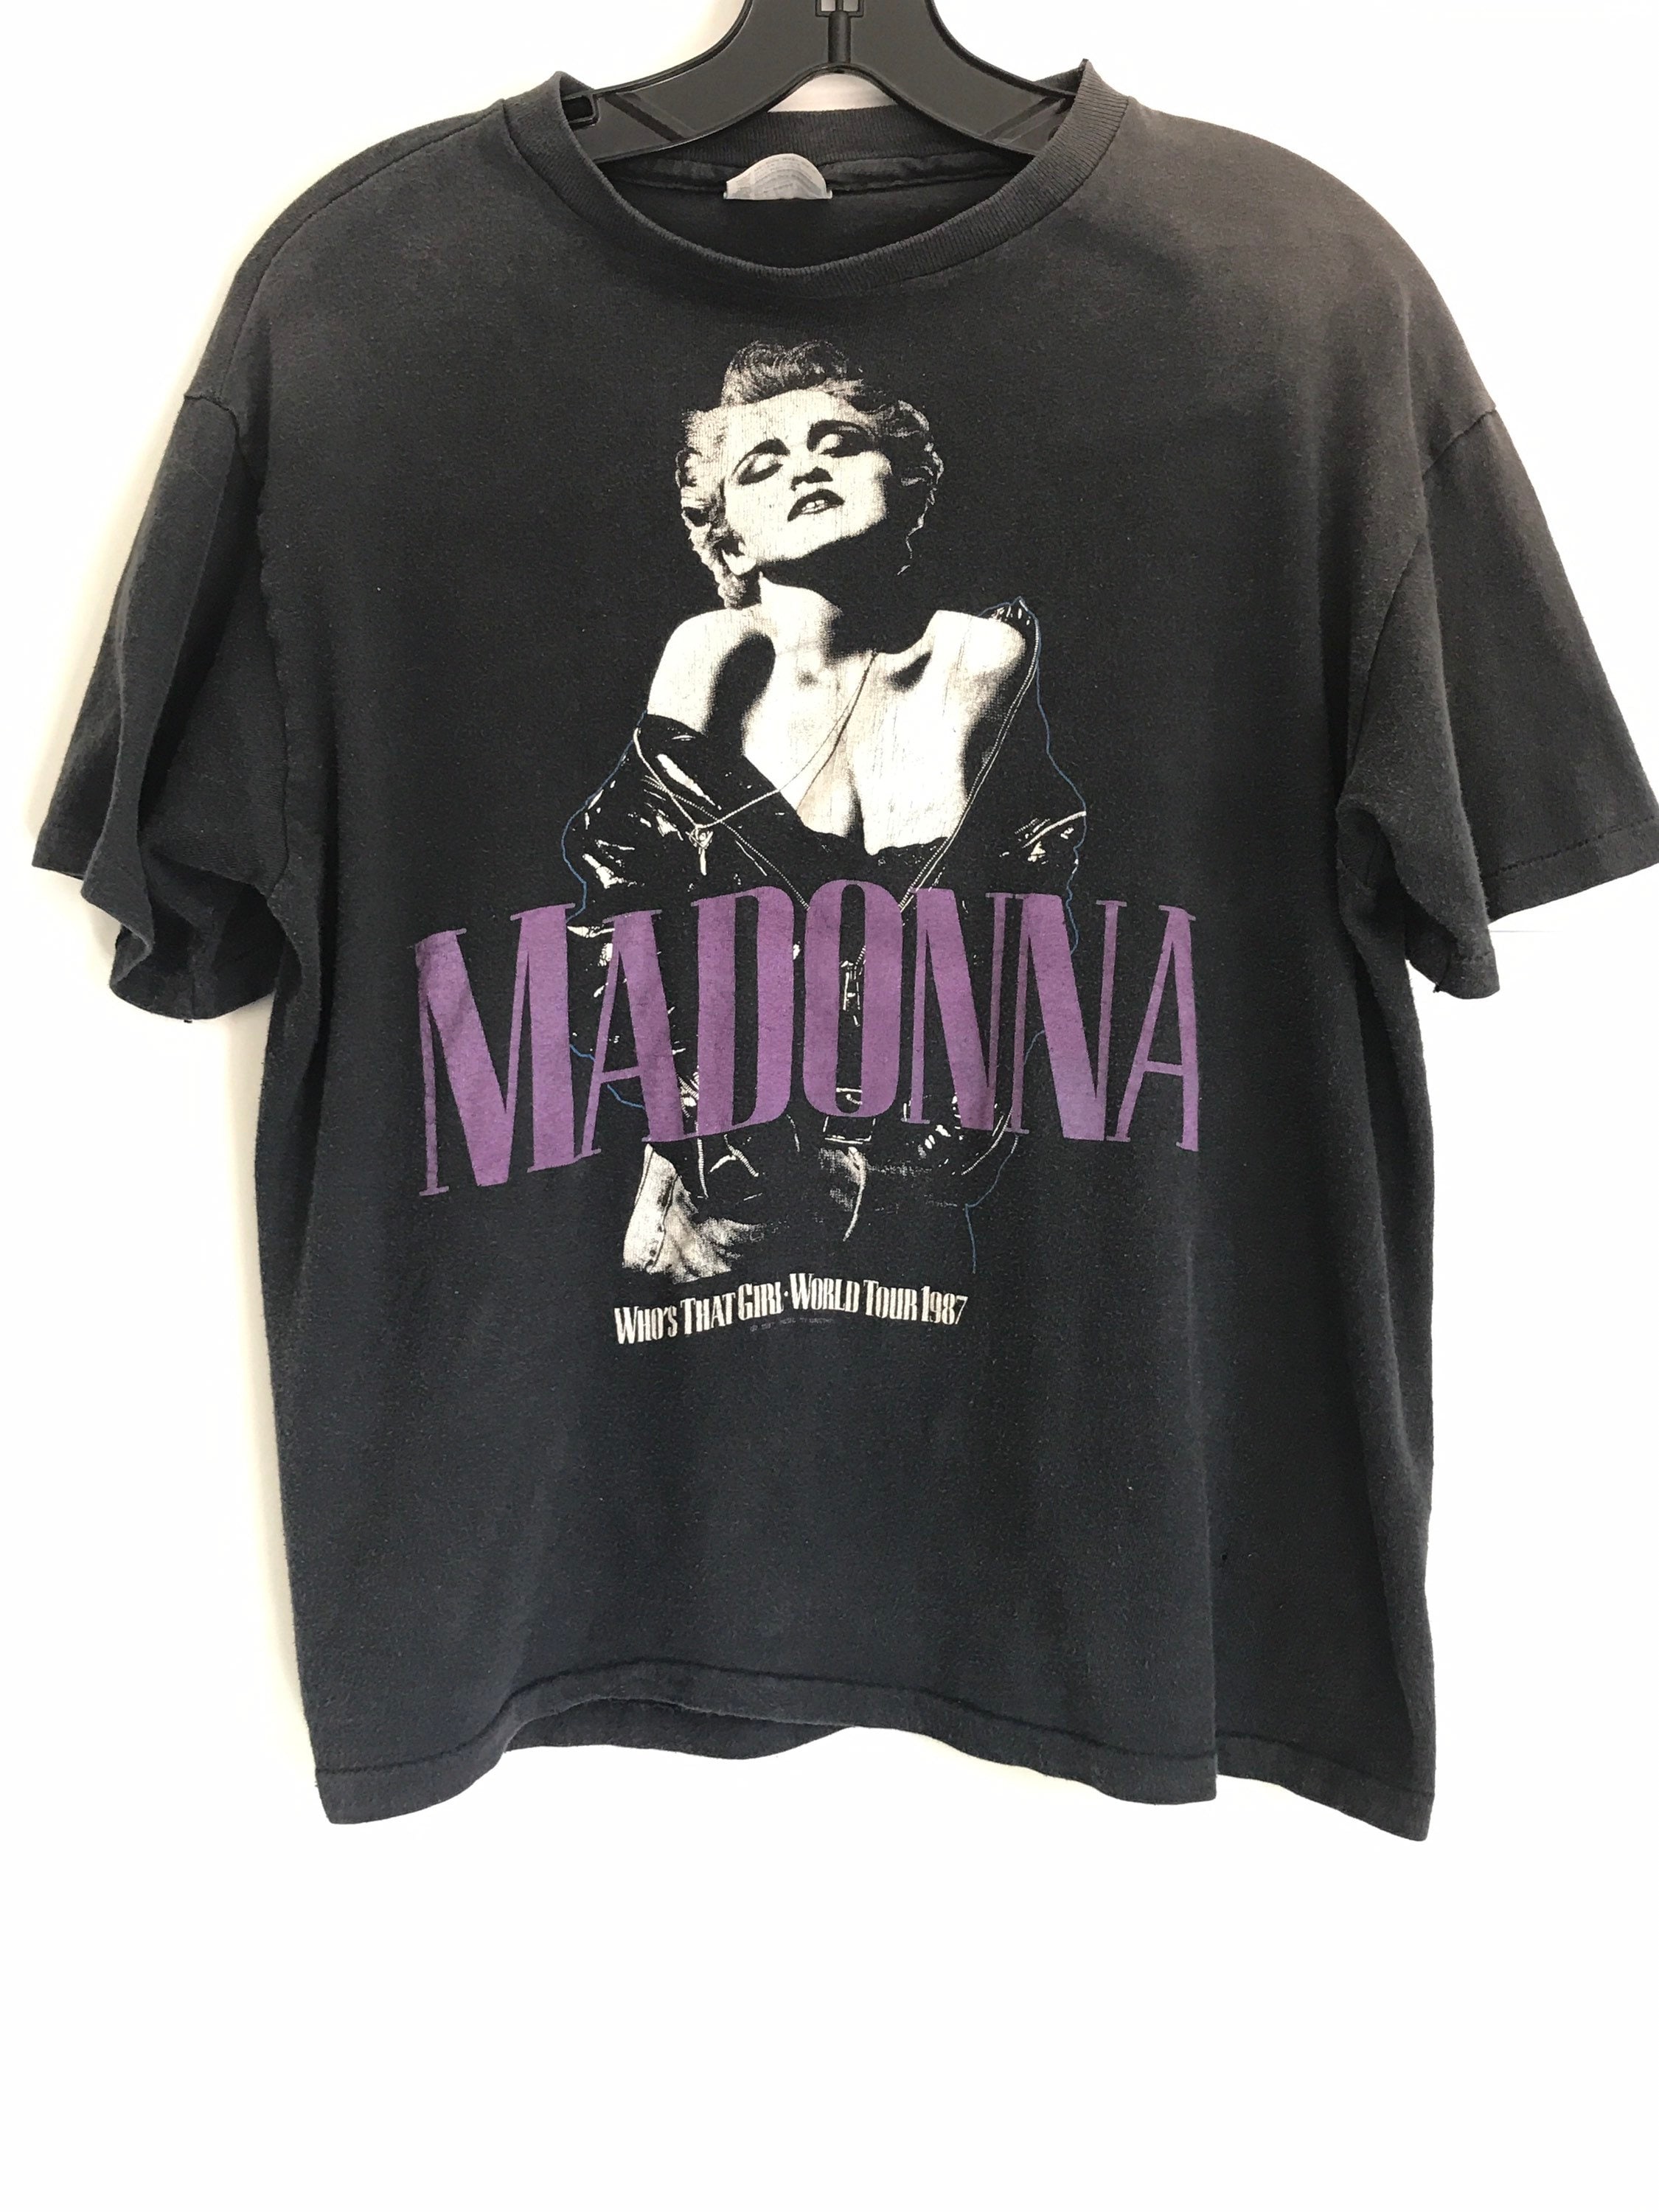 Discover Vintage 1987 Madonna Whos That Girl Tour Shirt